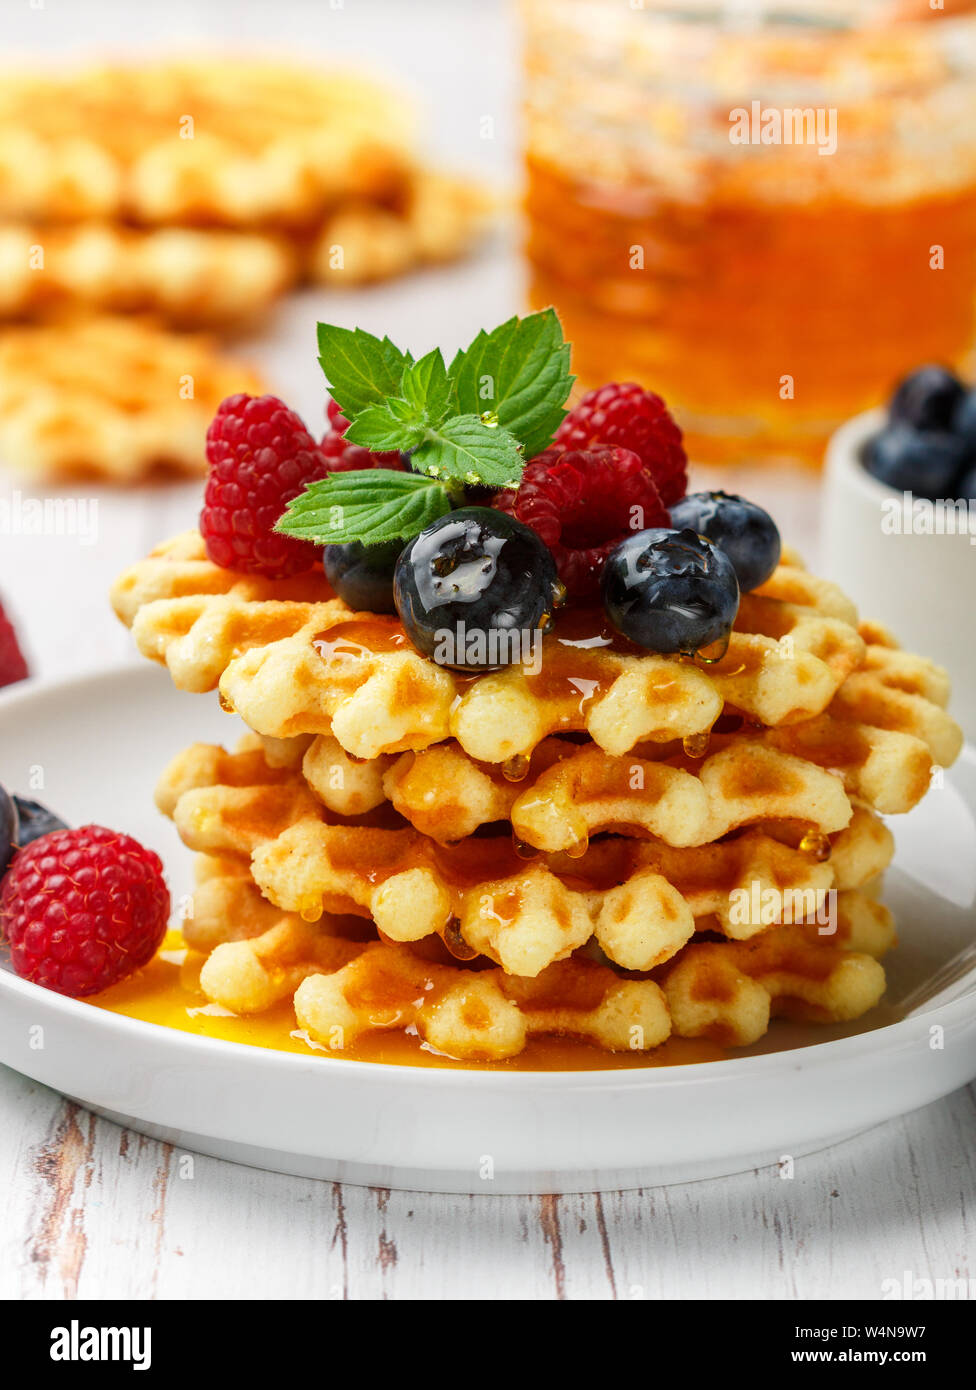 Viennese crispy waffles with fresh berries (raspberries and blueberries) with honey and mint leaves on a white plate on the table. Delicious homemade Stock Photo